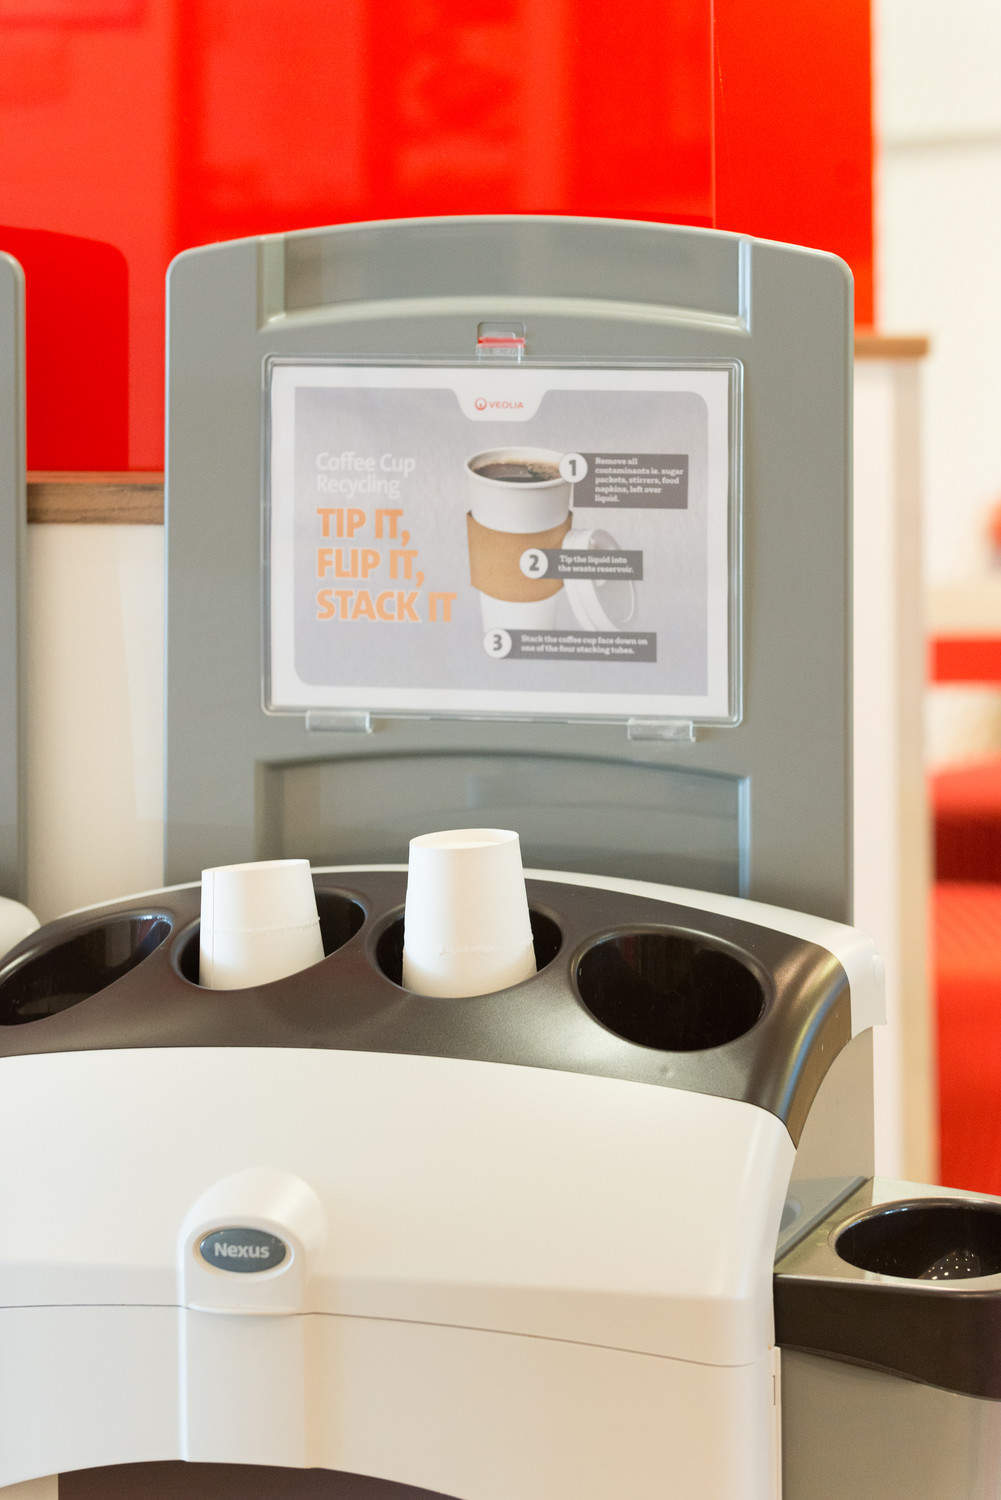 Veolia plans to recycle 120 million coffee cups in 2019